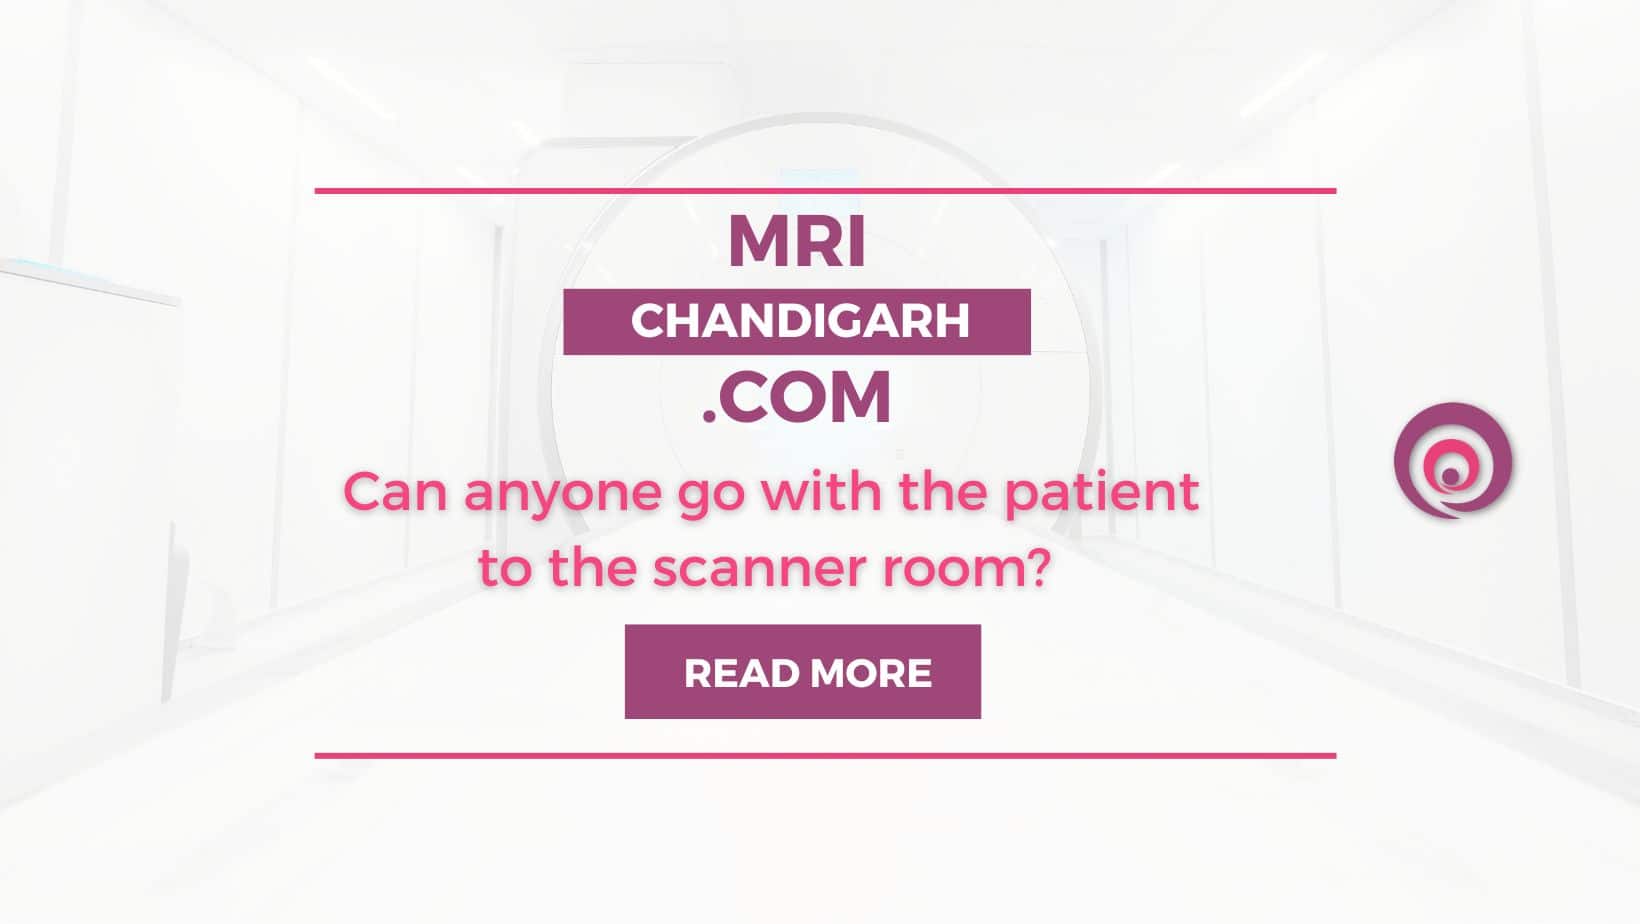 Can anyone go with the patient to the scanner room?